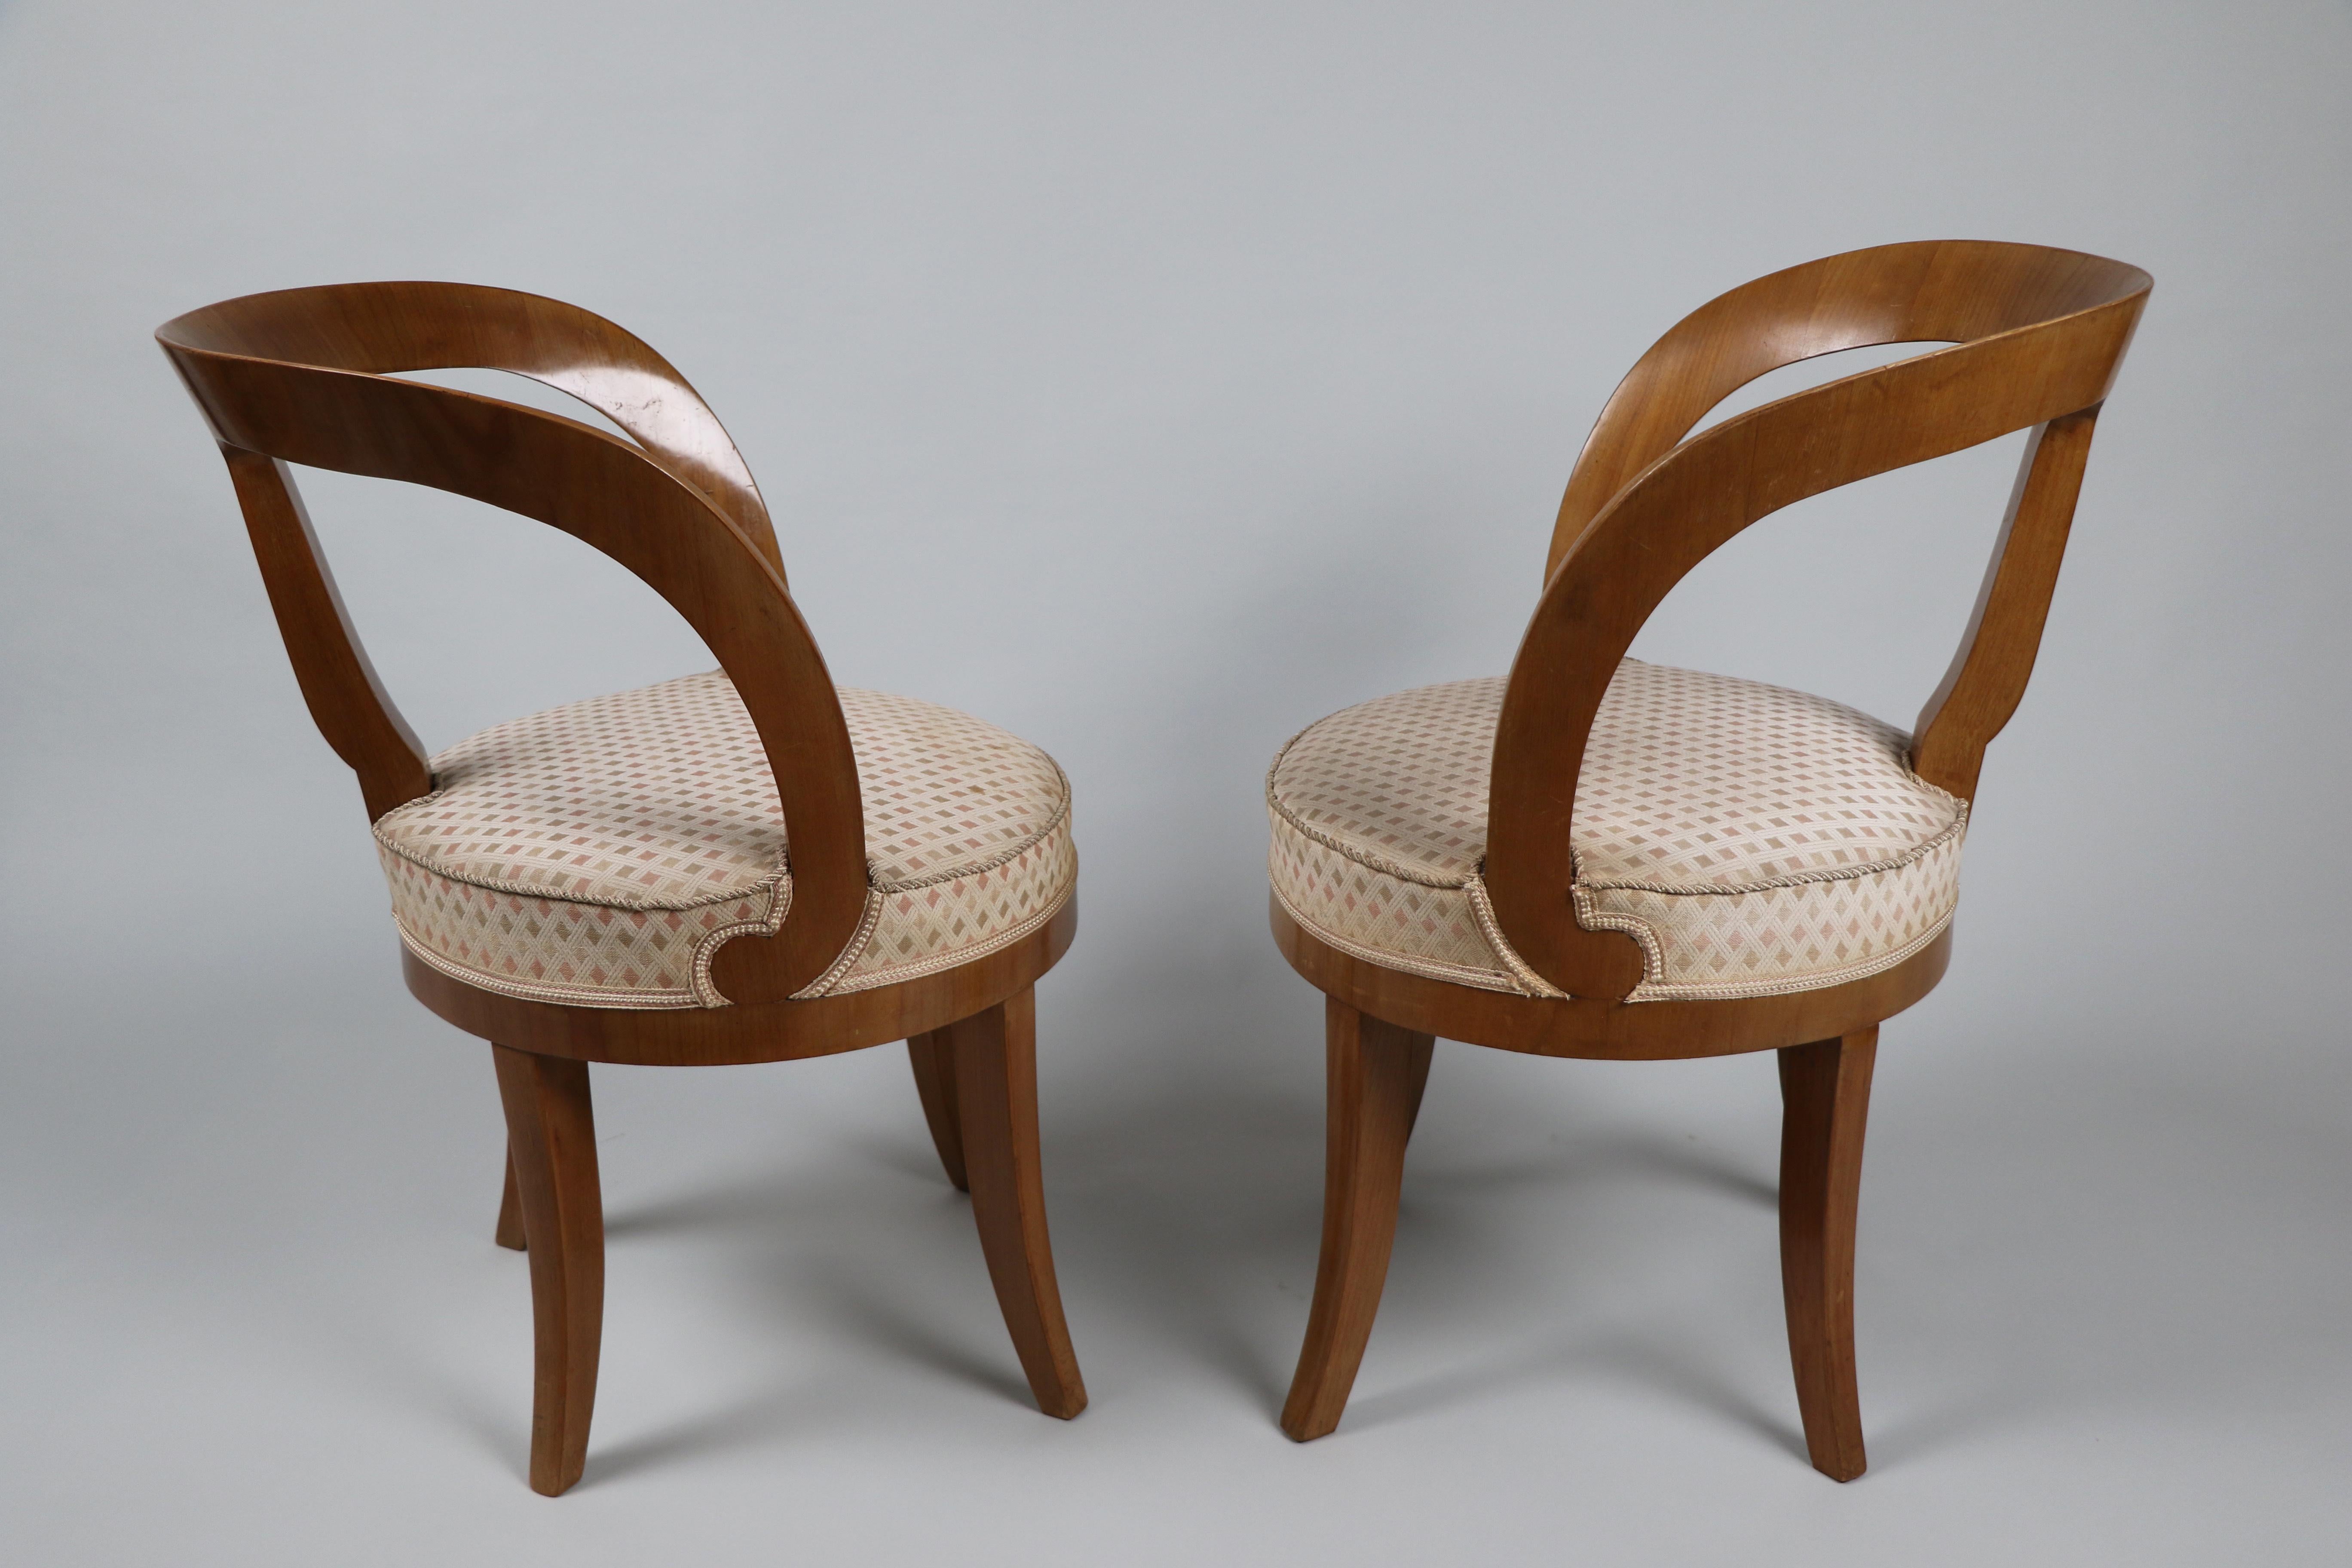 Upholstery 19th Century Fine Pair of Biedermeier Cherry Chairs. Vienna, c. 1825. For Sale